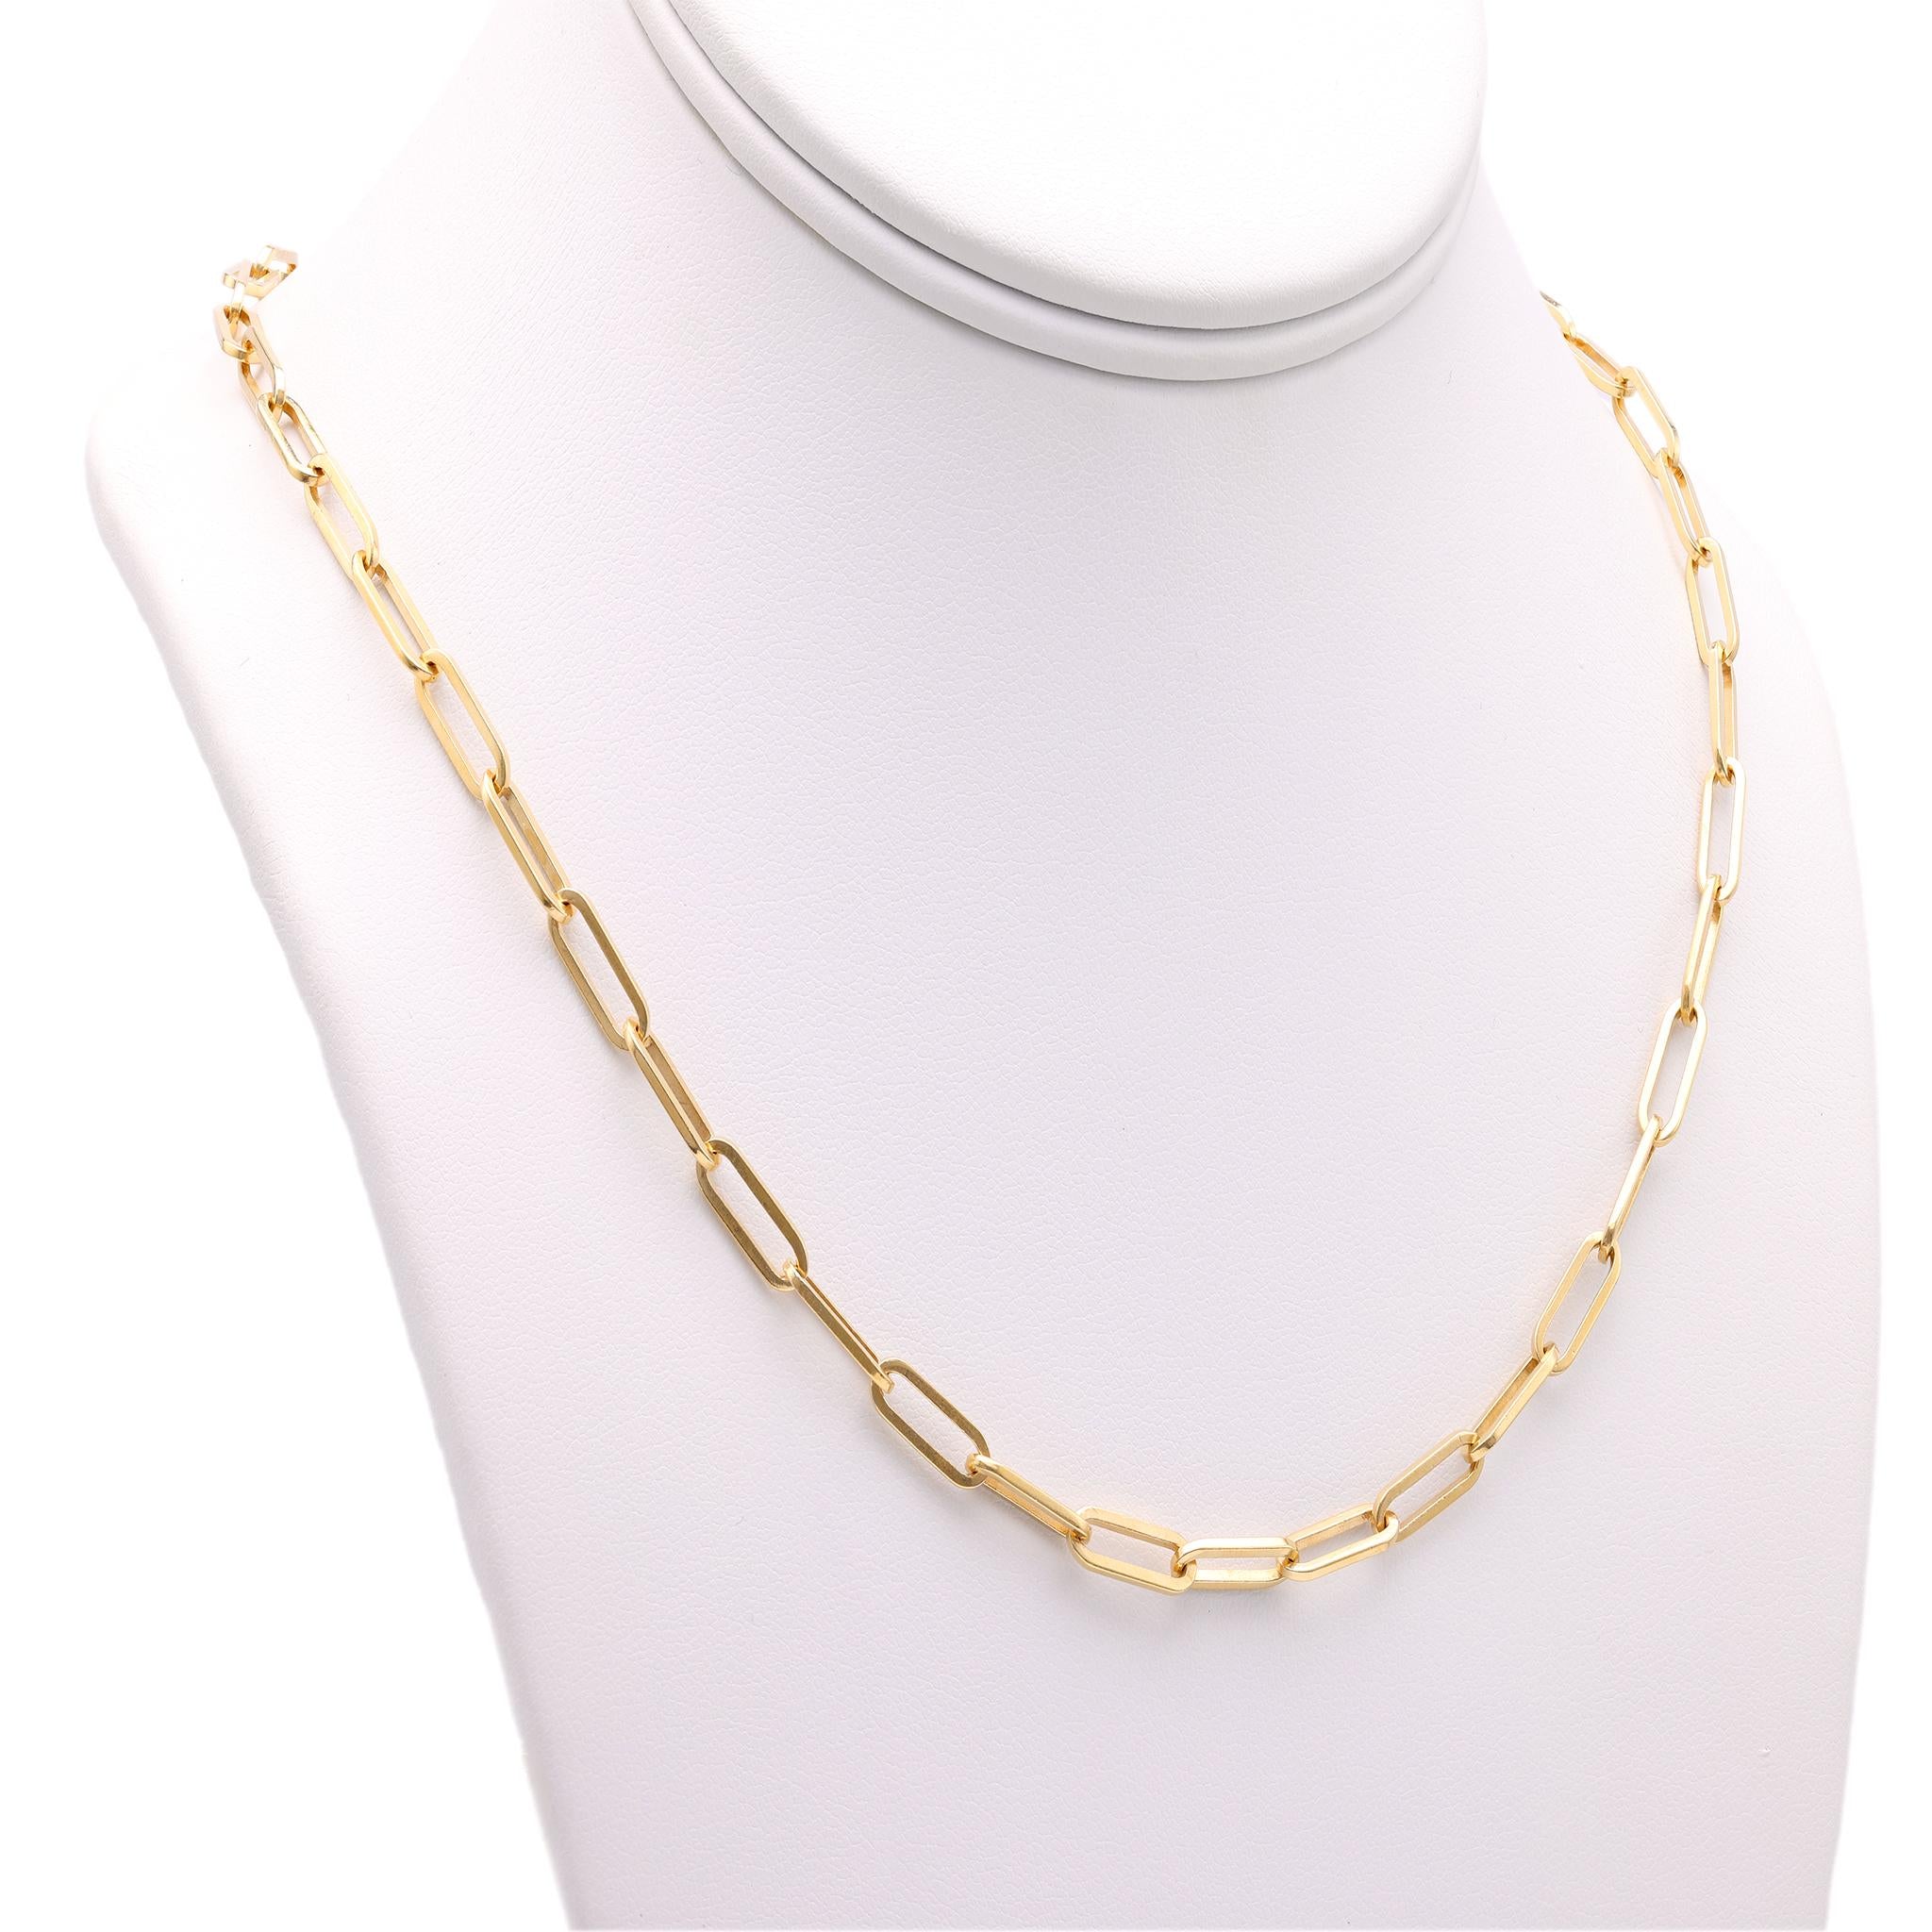 Vintage French Dinh Van 18k Yellow Gold Paperclip Necklace